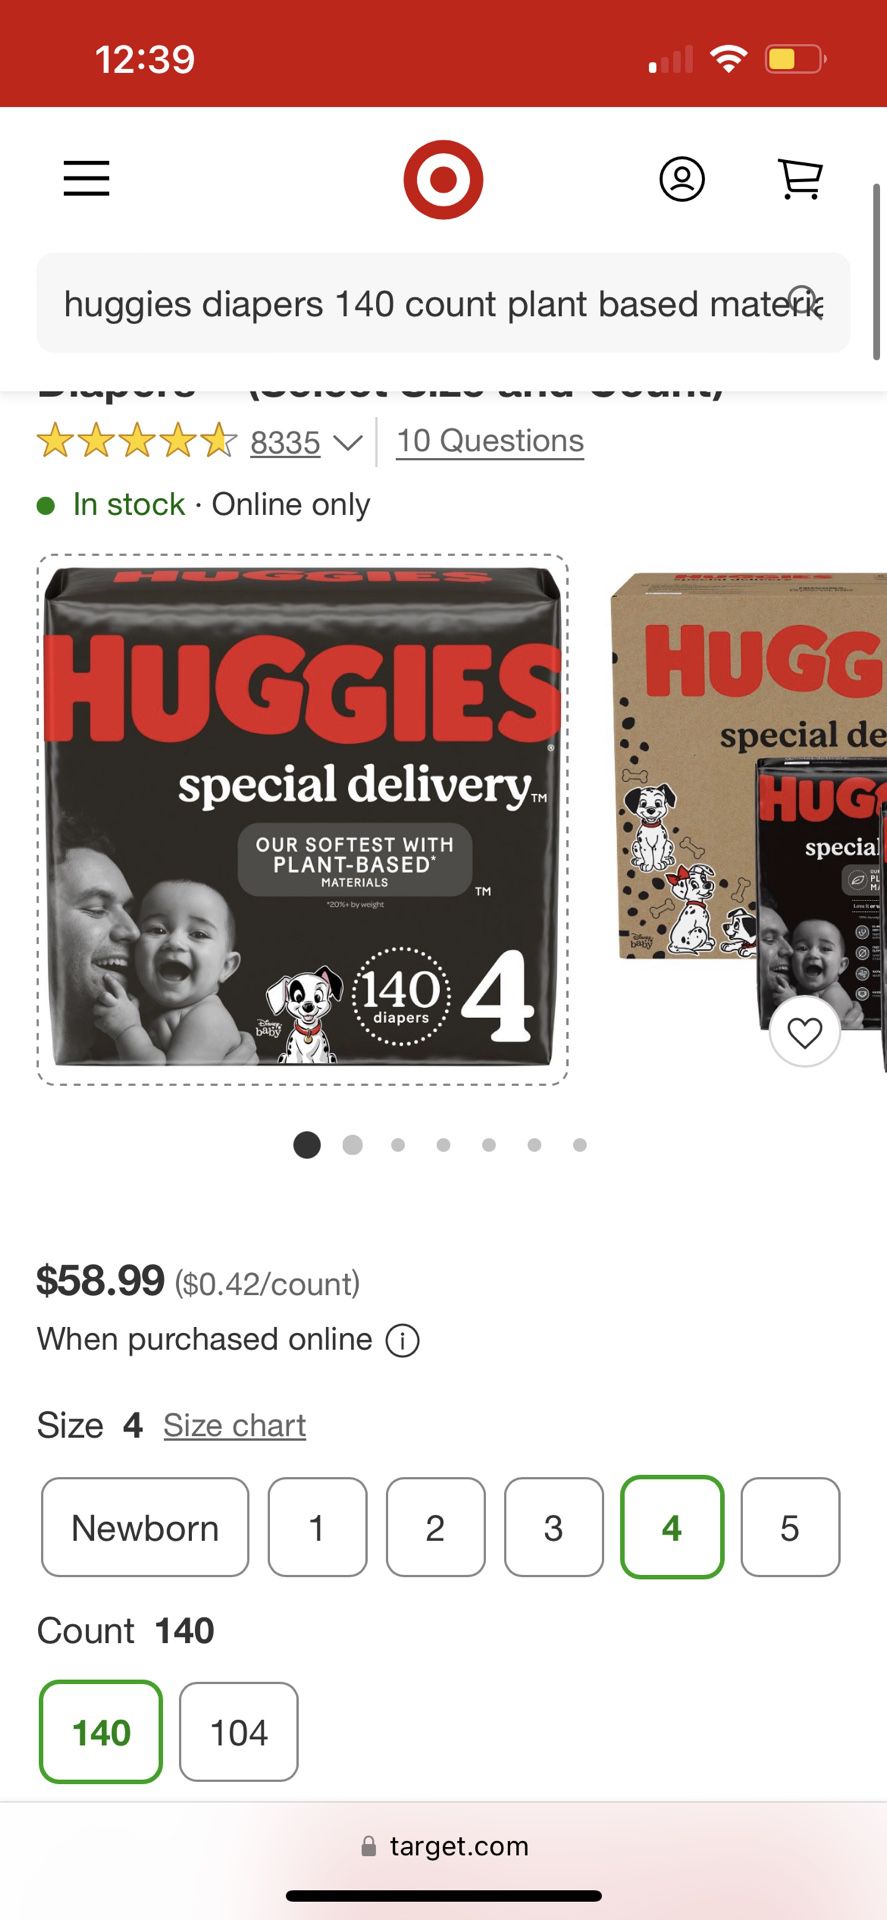 2 HUGGIES SPECIAL DELIVERY DISPOSABLE DIAPERS BOXES SIZE 4 COUNT 140 (BRAND NEW UNOPENED BOXES)  - $80